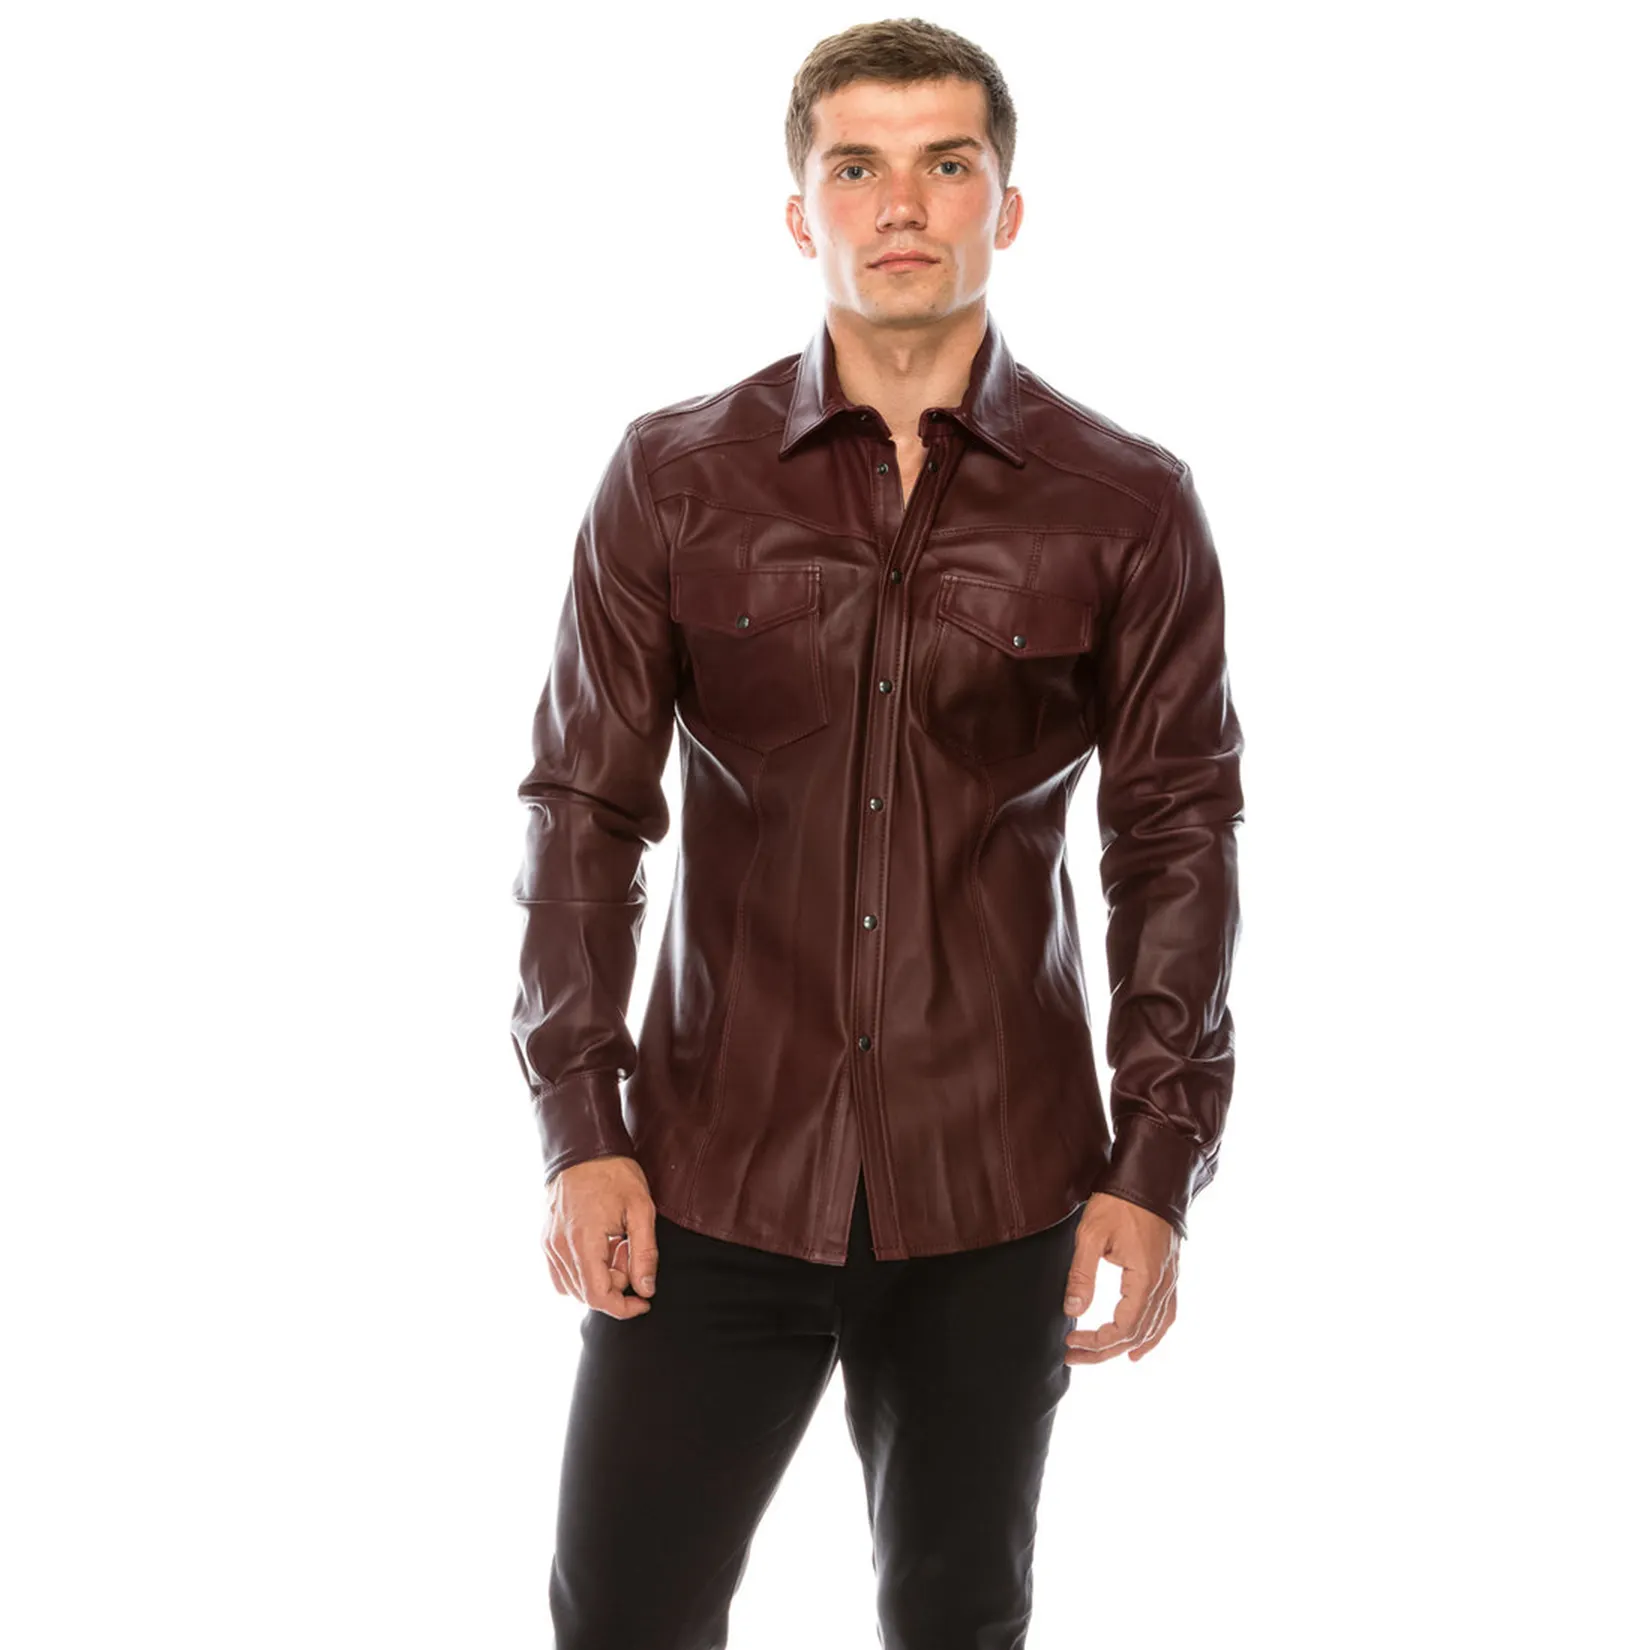 Genuine Sheep Leather Shirts For Men In Bulk High Quality Made In Pakistan